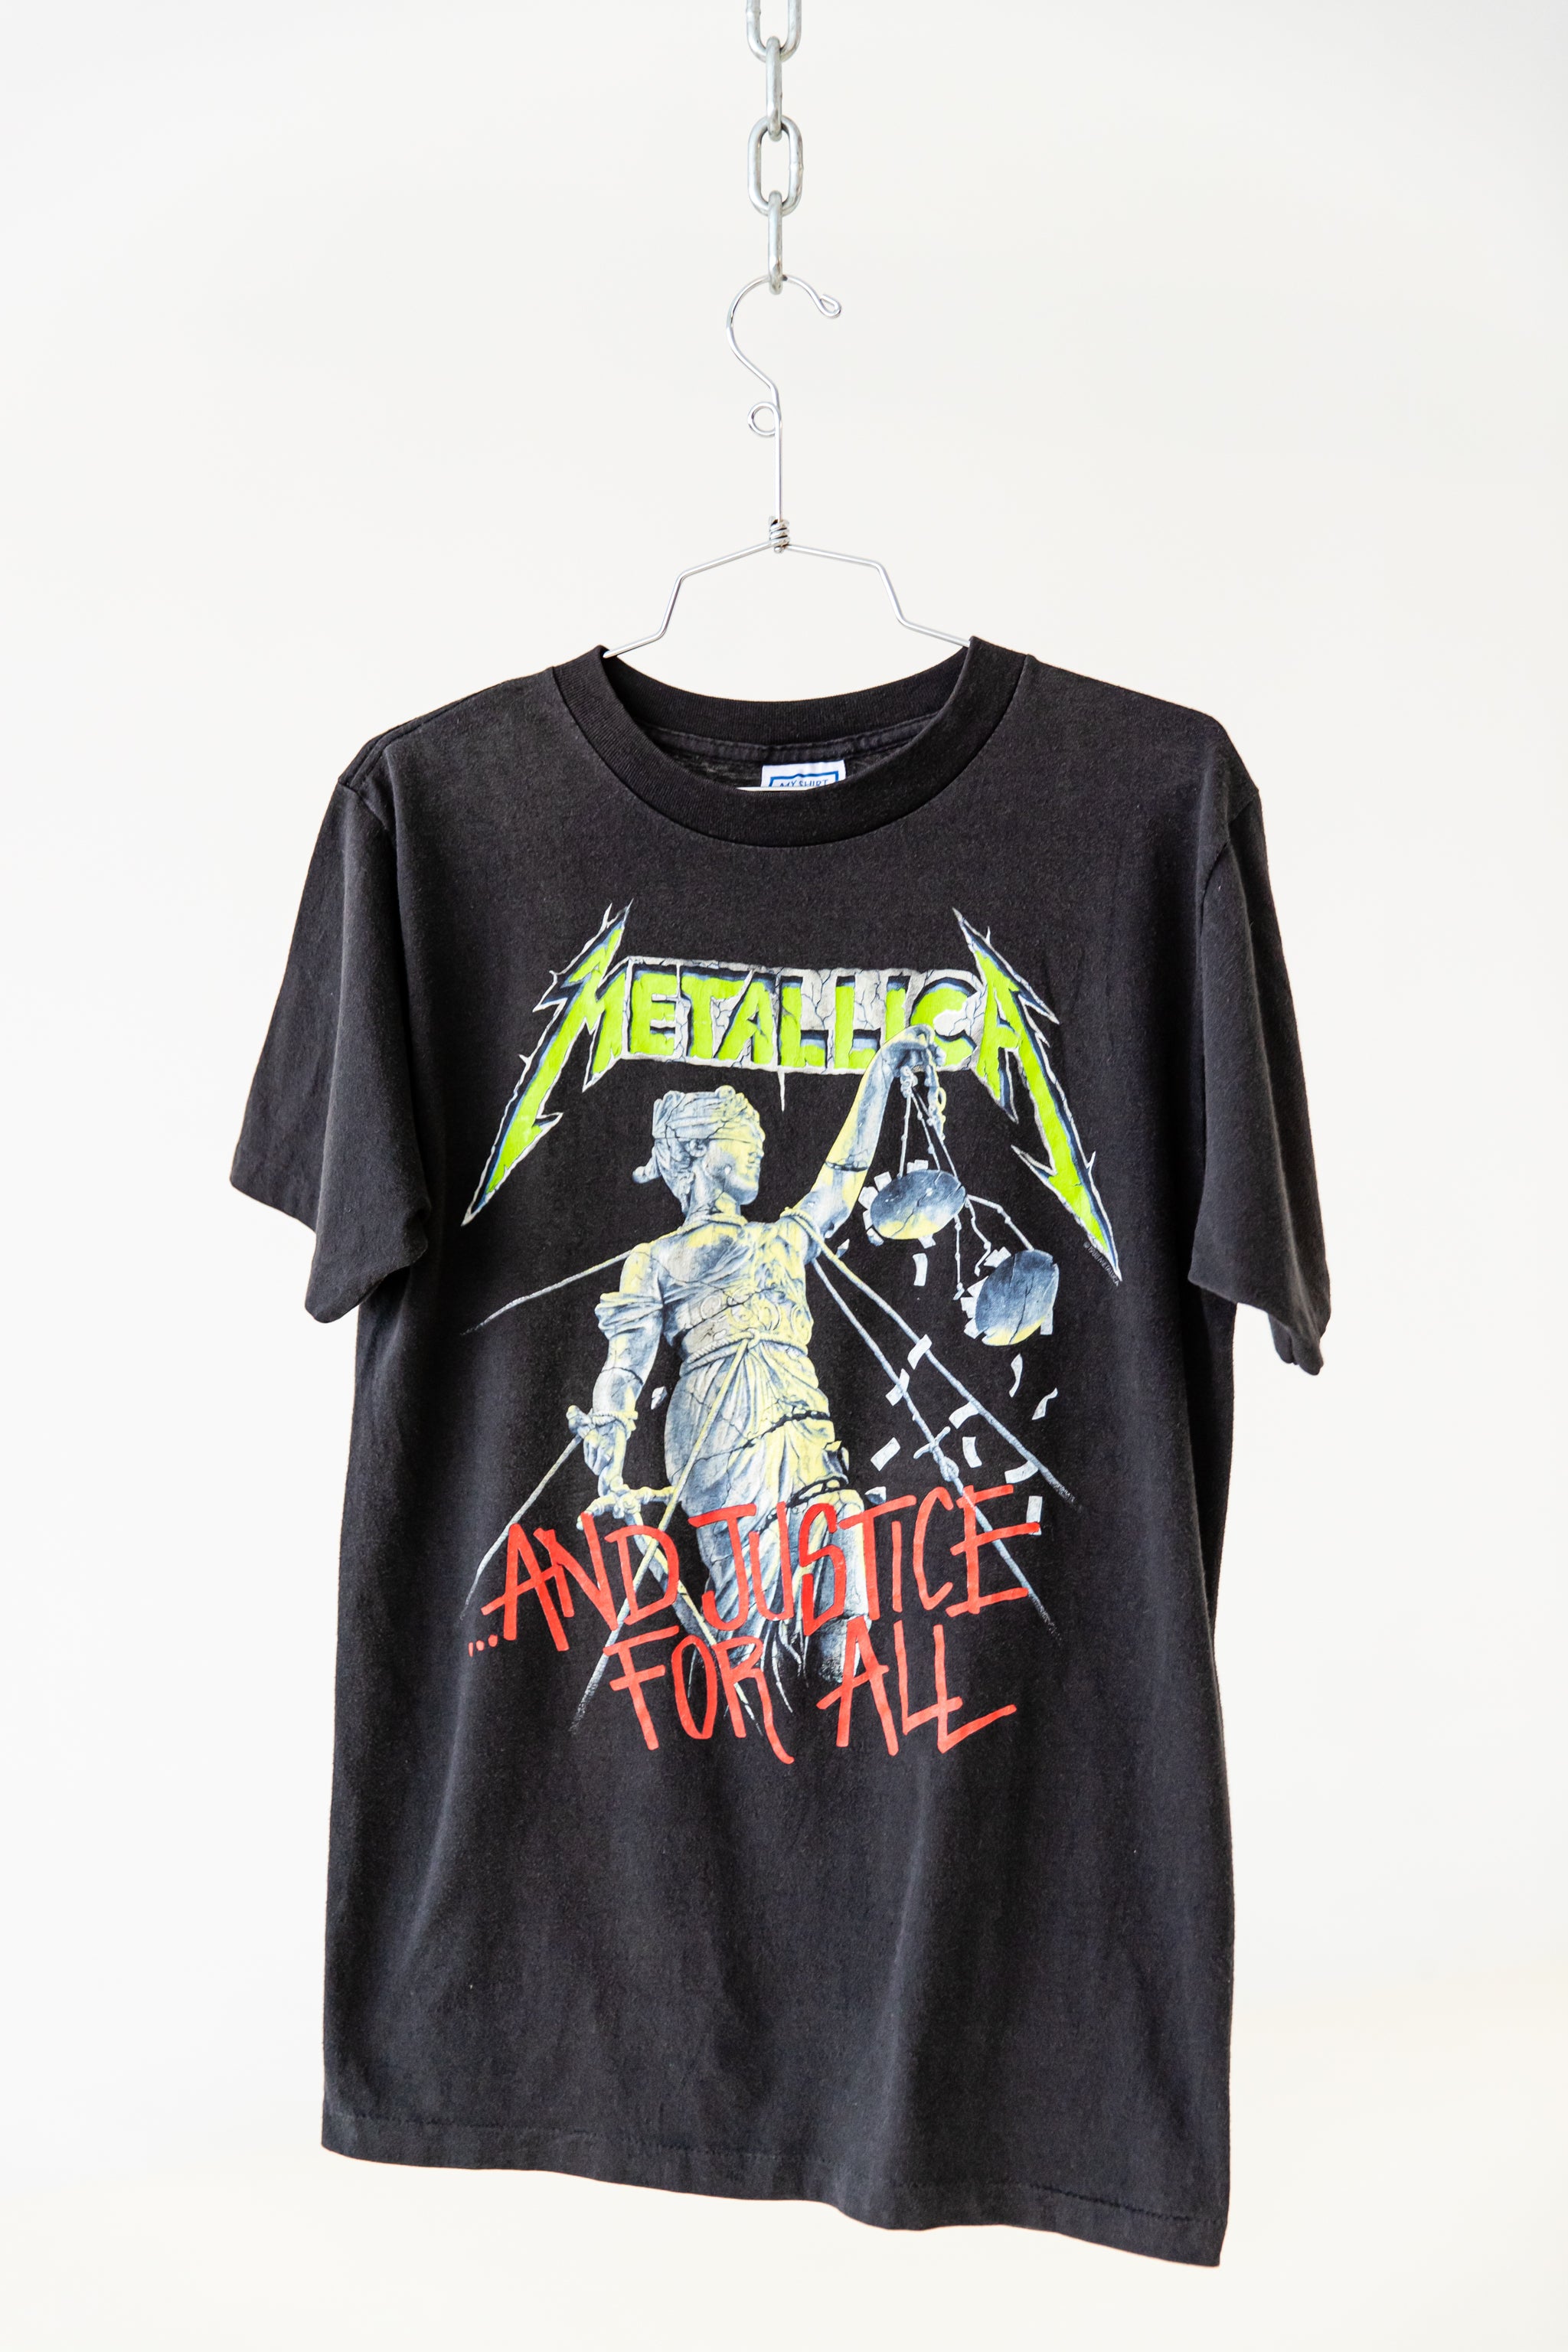 Vintage 1980's METALLICA Justice For All Hammer Of Justice Crushes